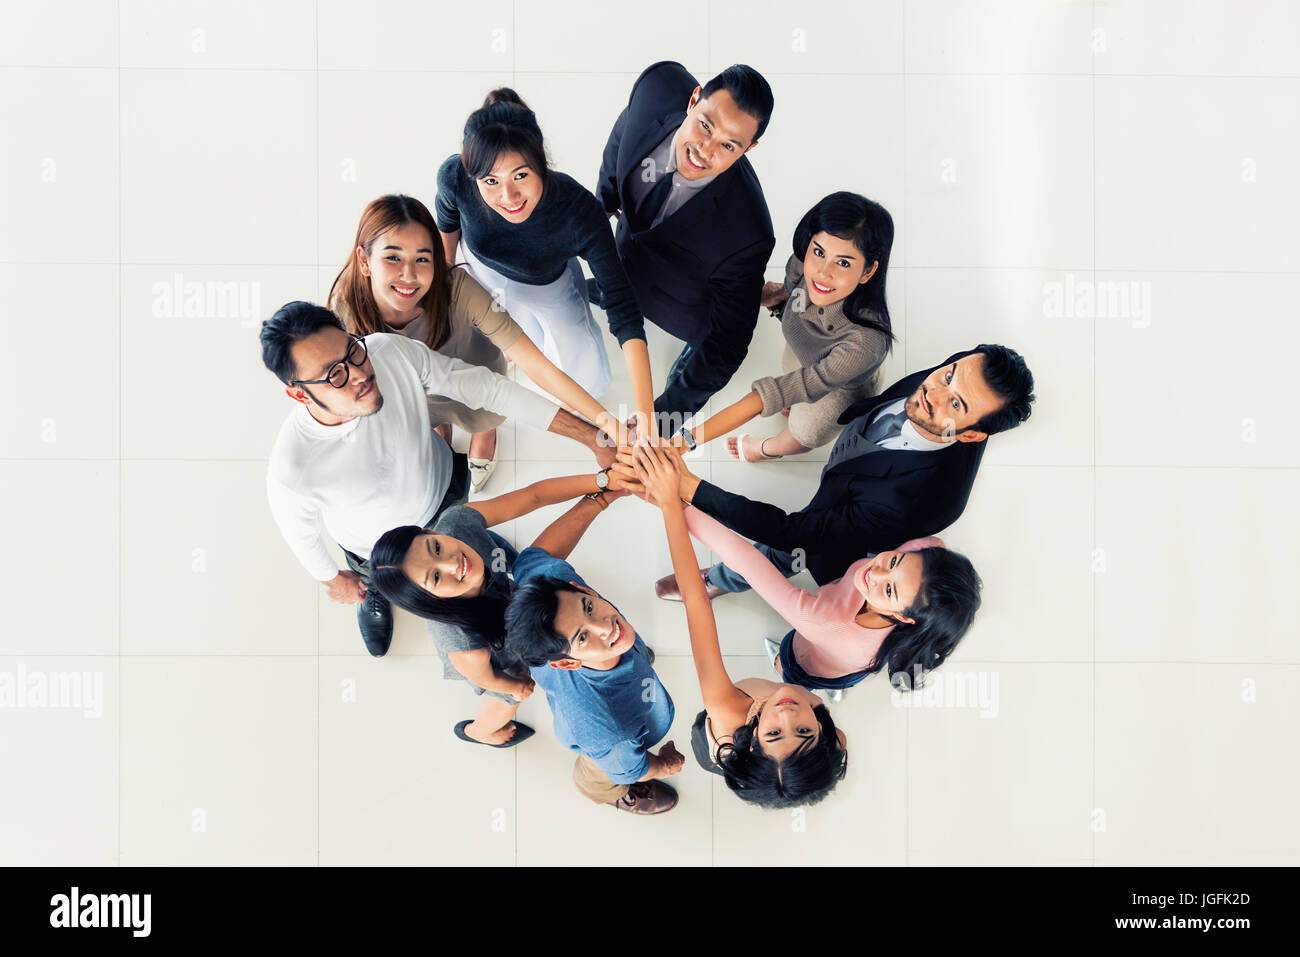 Top view of Group of multi-ethnic business partners putting hands together. Concept of business teamwork and success. Stock Photo